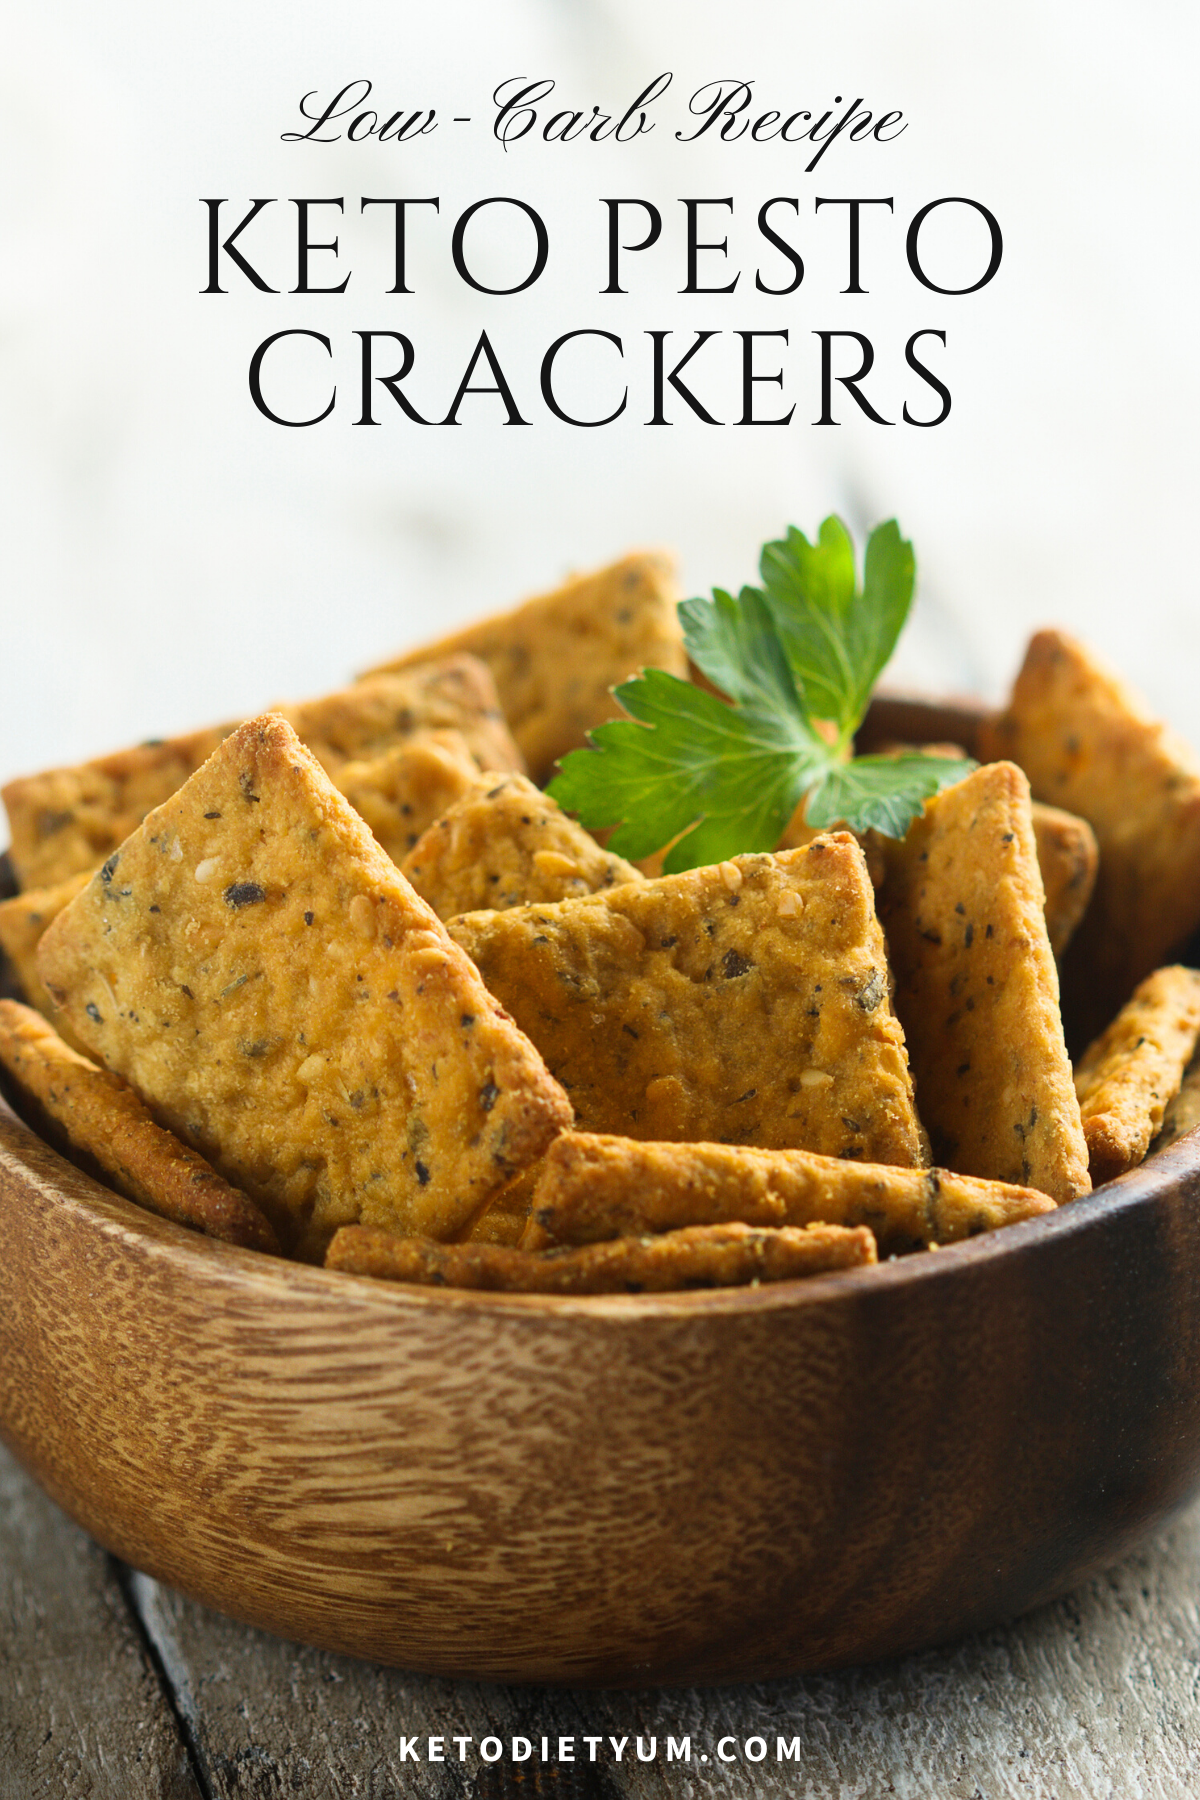 These delicious Keto Pesto Crackers have a crispy buttery texture that is to die for. A beautiful Italian taste with the combination of basil, garlic, black pepper and a hint of cayenne to give them a kick! Enjoy them with cheese or with your favorite soup or salad. #ketodiet #ketorecipes #lowcarbrecipes